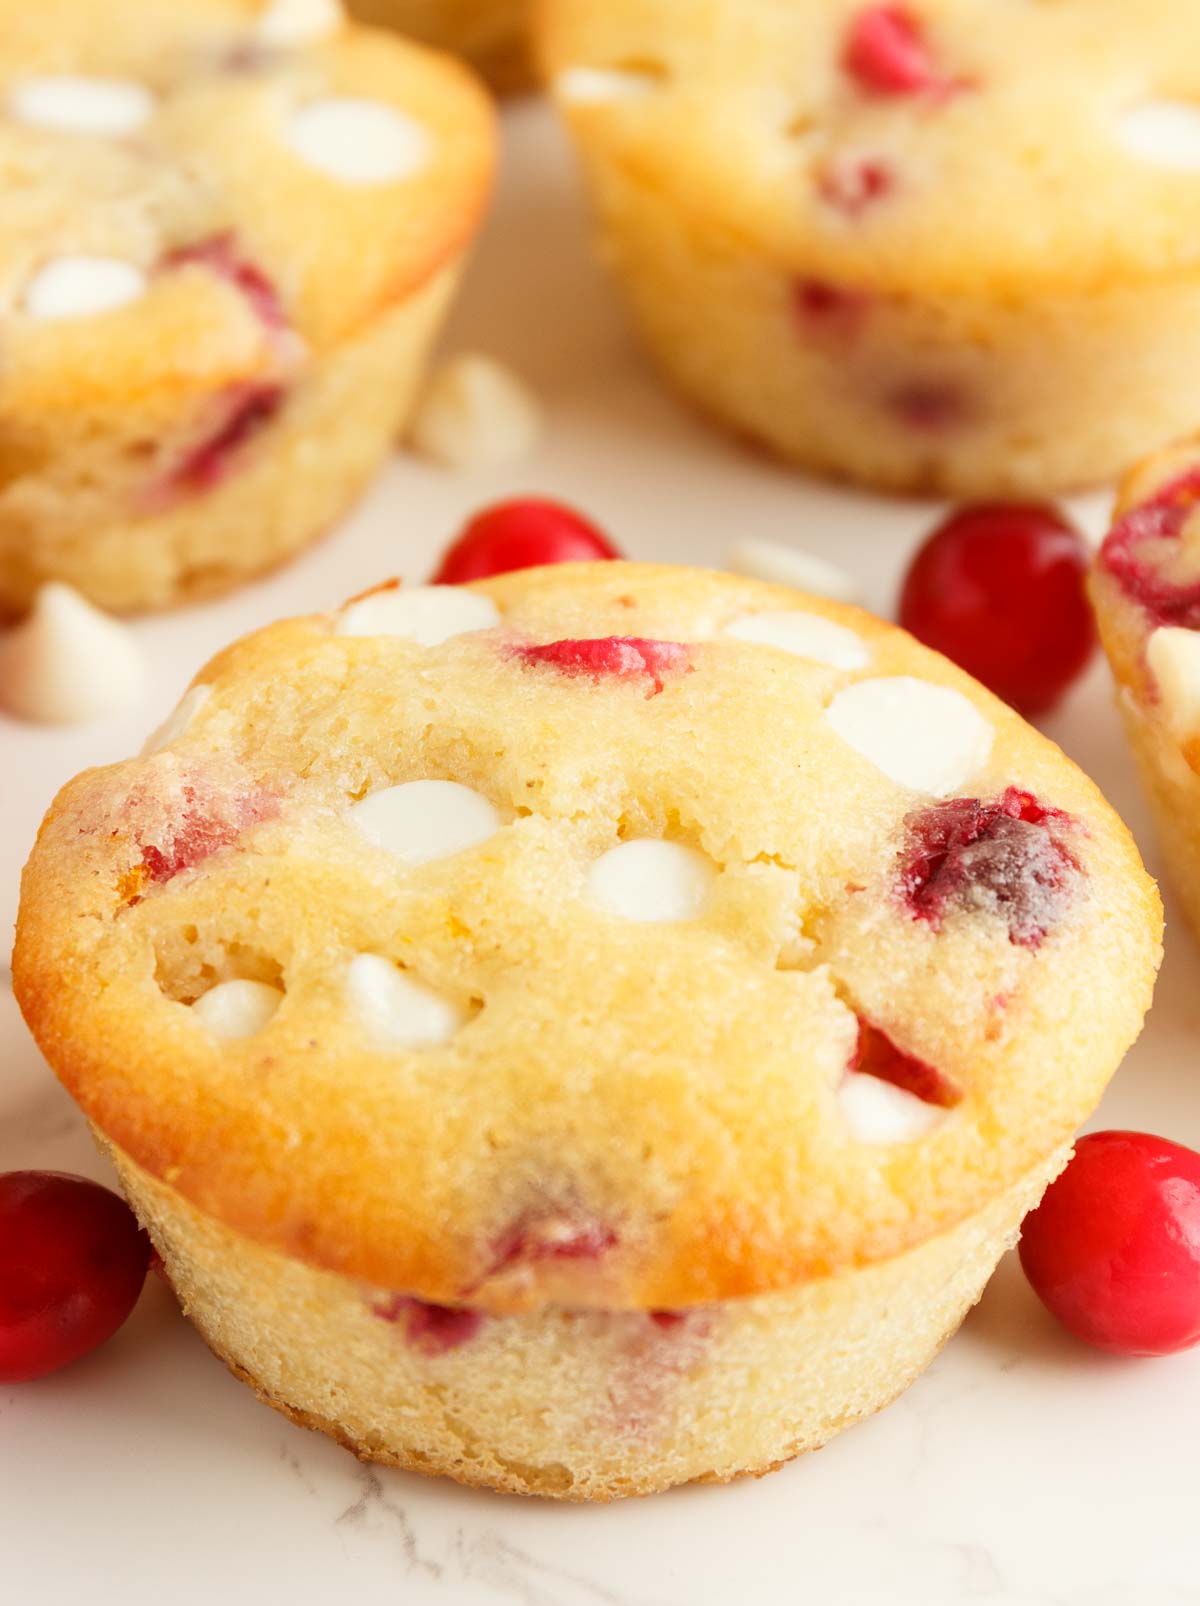 Keto Orange Cranberry Muffins with white chocolate chips and scattered cranberries.